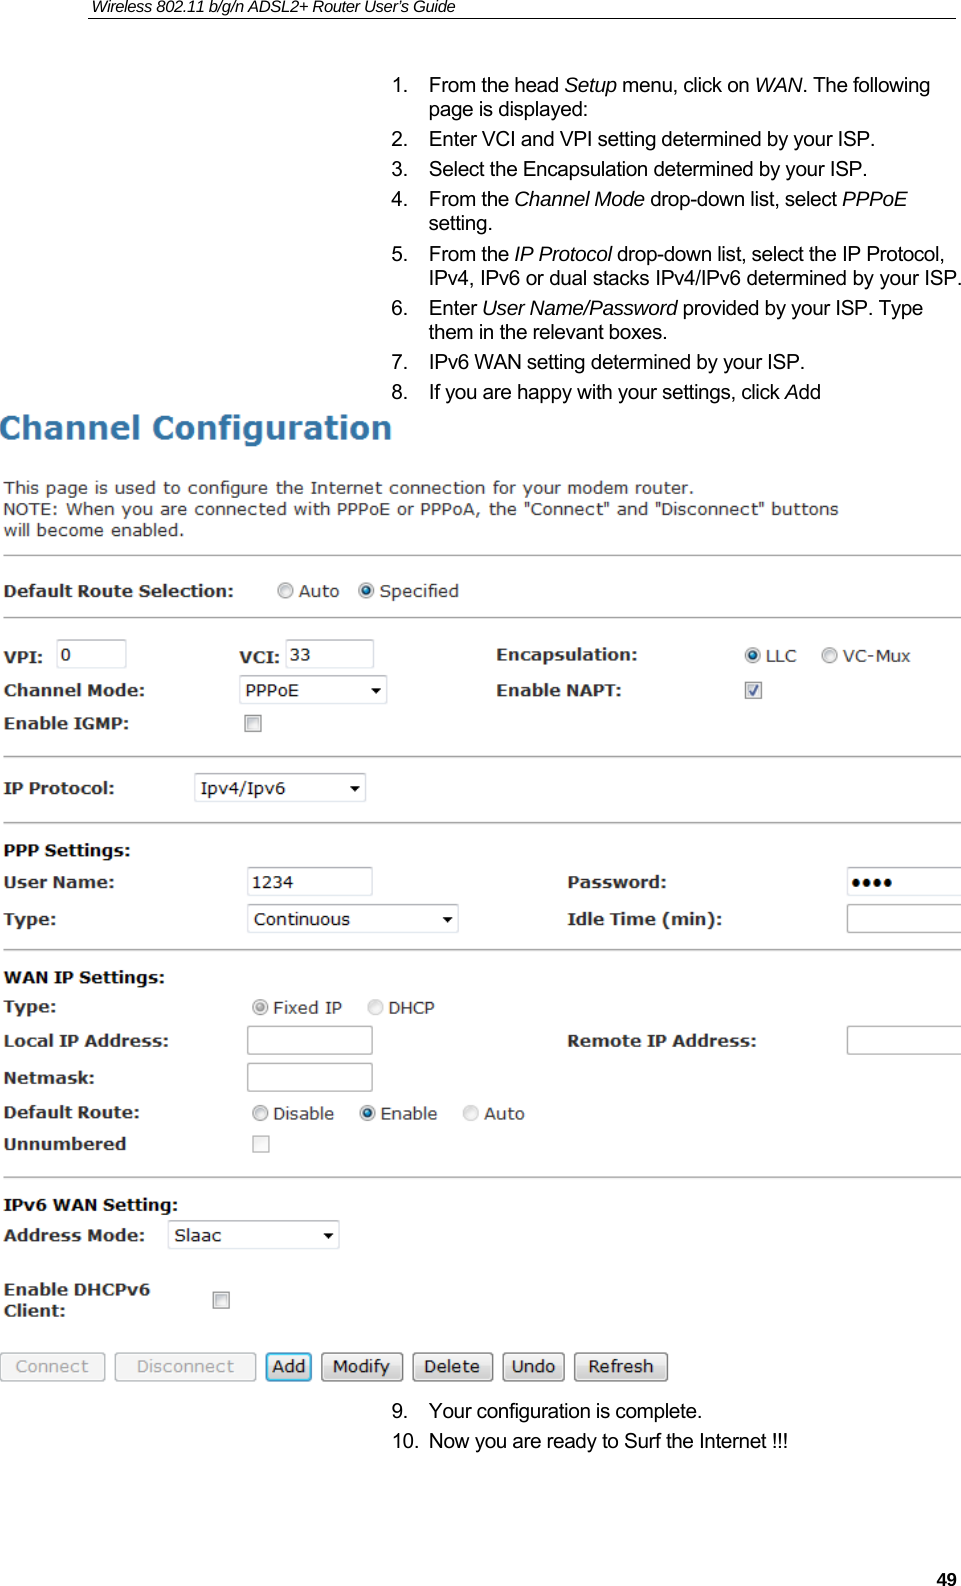 Wireless 802.11 b/g/n ADSL2+ Router User’s Guide    1. From the head Setup menu, click on WAN. The following page is displayed: 2.  Enter VCI and VPI setting determined by your ISP. 3.  Select the Encapsulation determined by your ISP. 4. From the Channel Mode drop-down list, select PPPoE setting. 5. From the IP Protocol drop-down list, select the IP Protocol, IPv4, IPv6 or dual stacks IPv4/IPv6 determined by your ISP. 6. Enter User Name/Password provided by your ISP. Type them in the relevant boxes. 7.  IPv6 WAN setting determined by your ISP. 8.  If you are happy with your settings, click Add  9.  Your configuration is complete. 10.  Now you are ready to Surf the Internet !!!   49